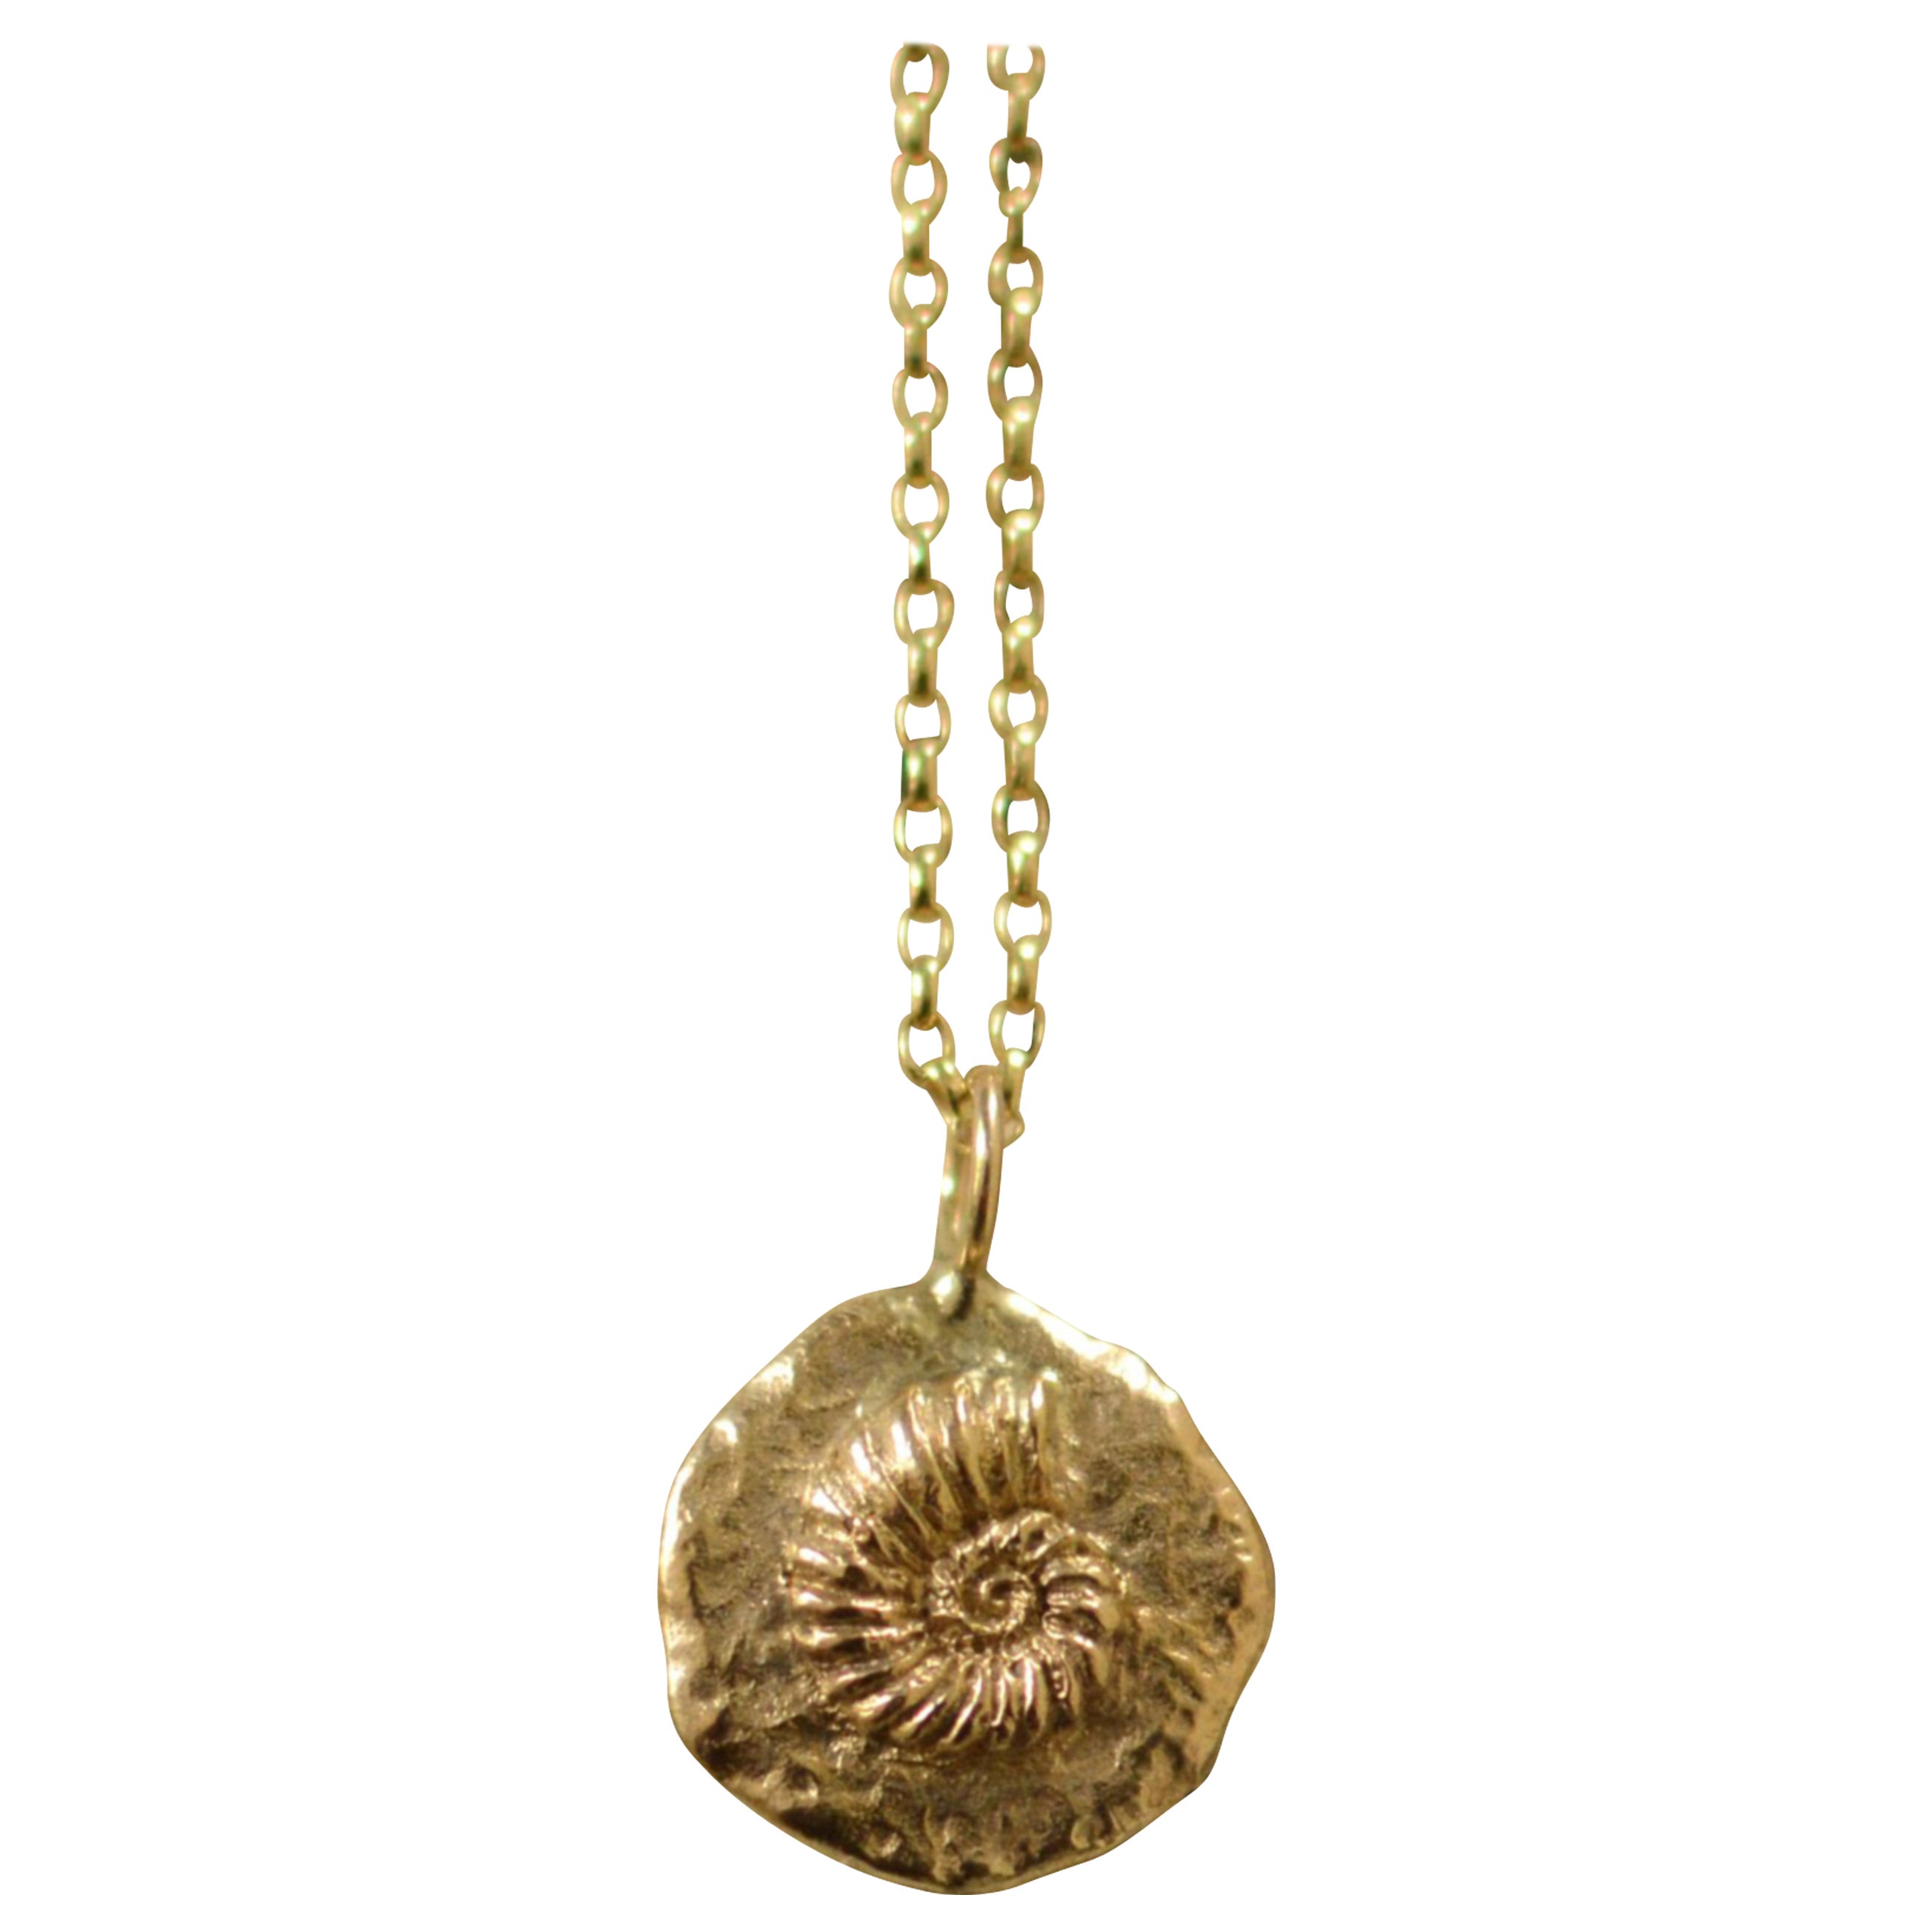 Solid 18 Carat Gold Ammonite Pendant by Lucy Stopes-Roe For Sale